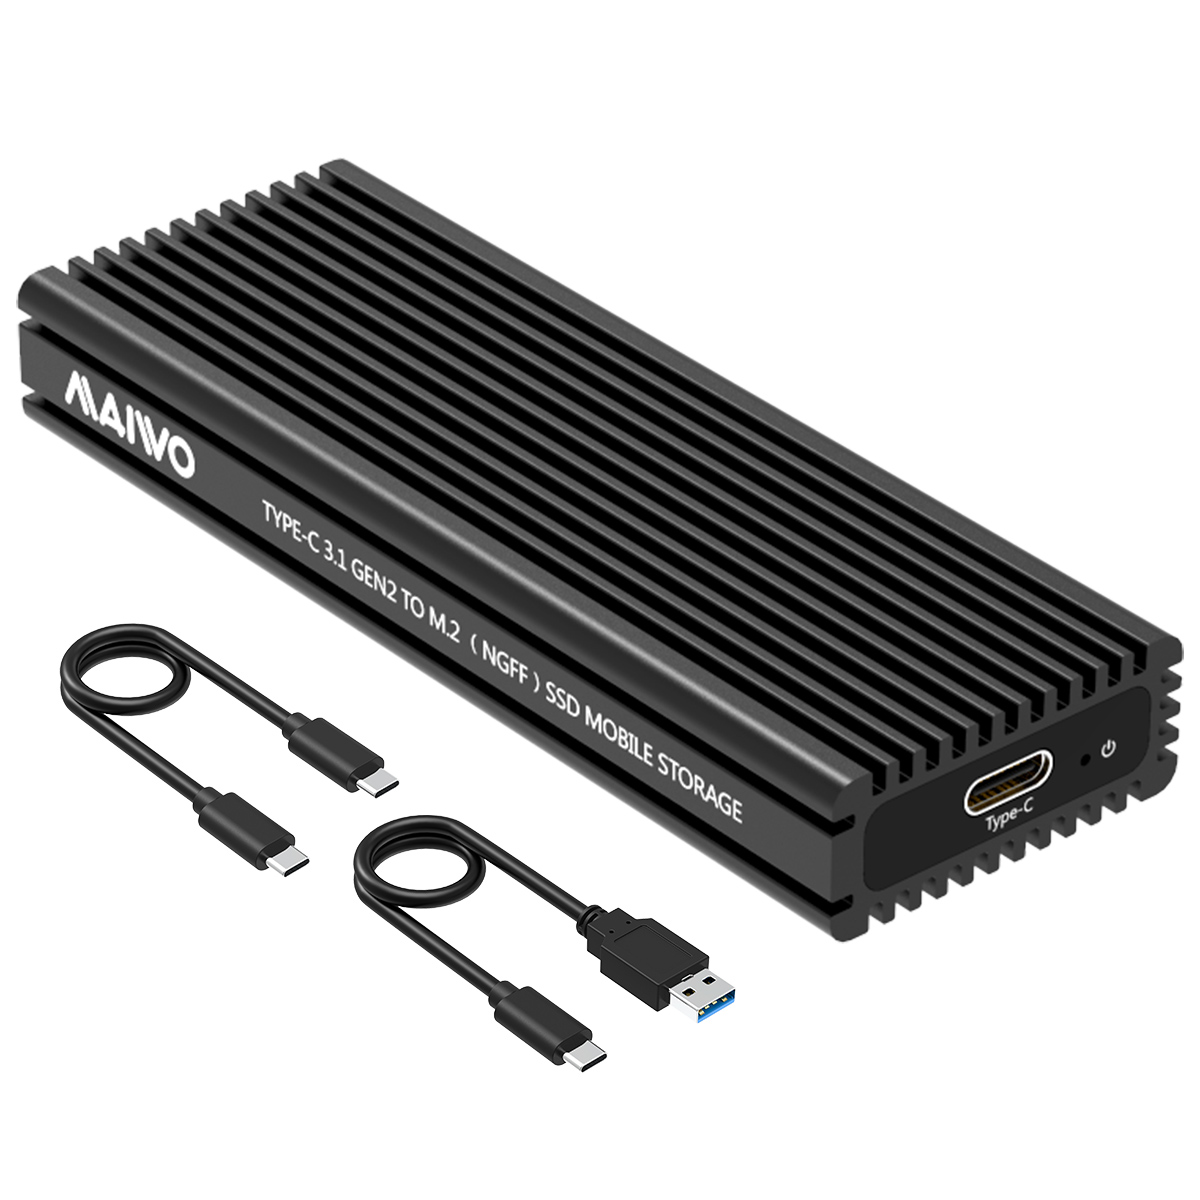 MAIWO TypeC to M key NVMe M.2 SSD enclosure with aluminum case to speed 10Gbps.support M.2 2230,2242